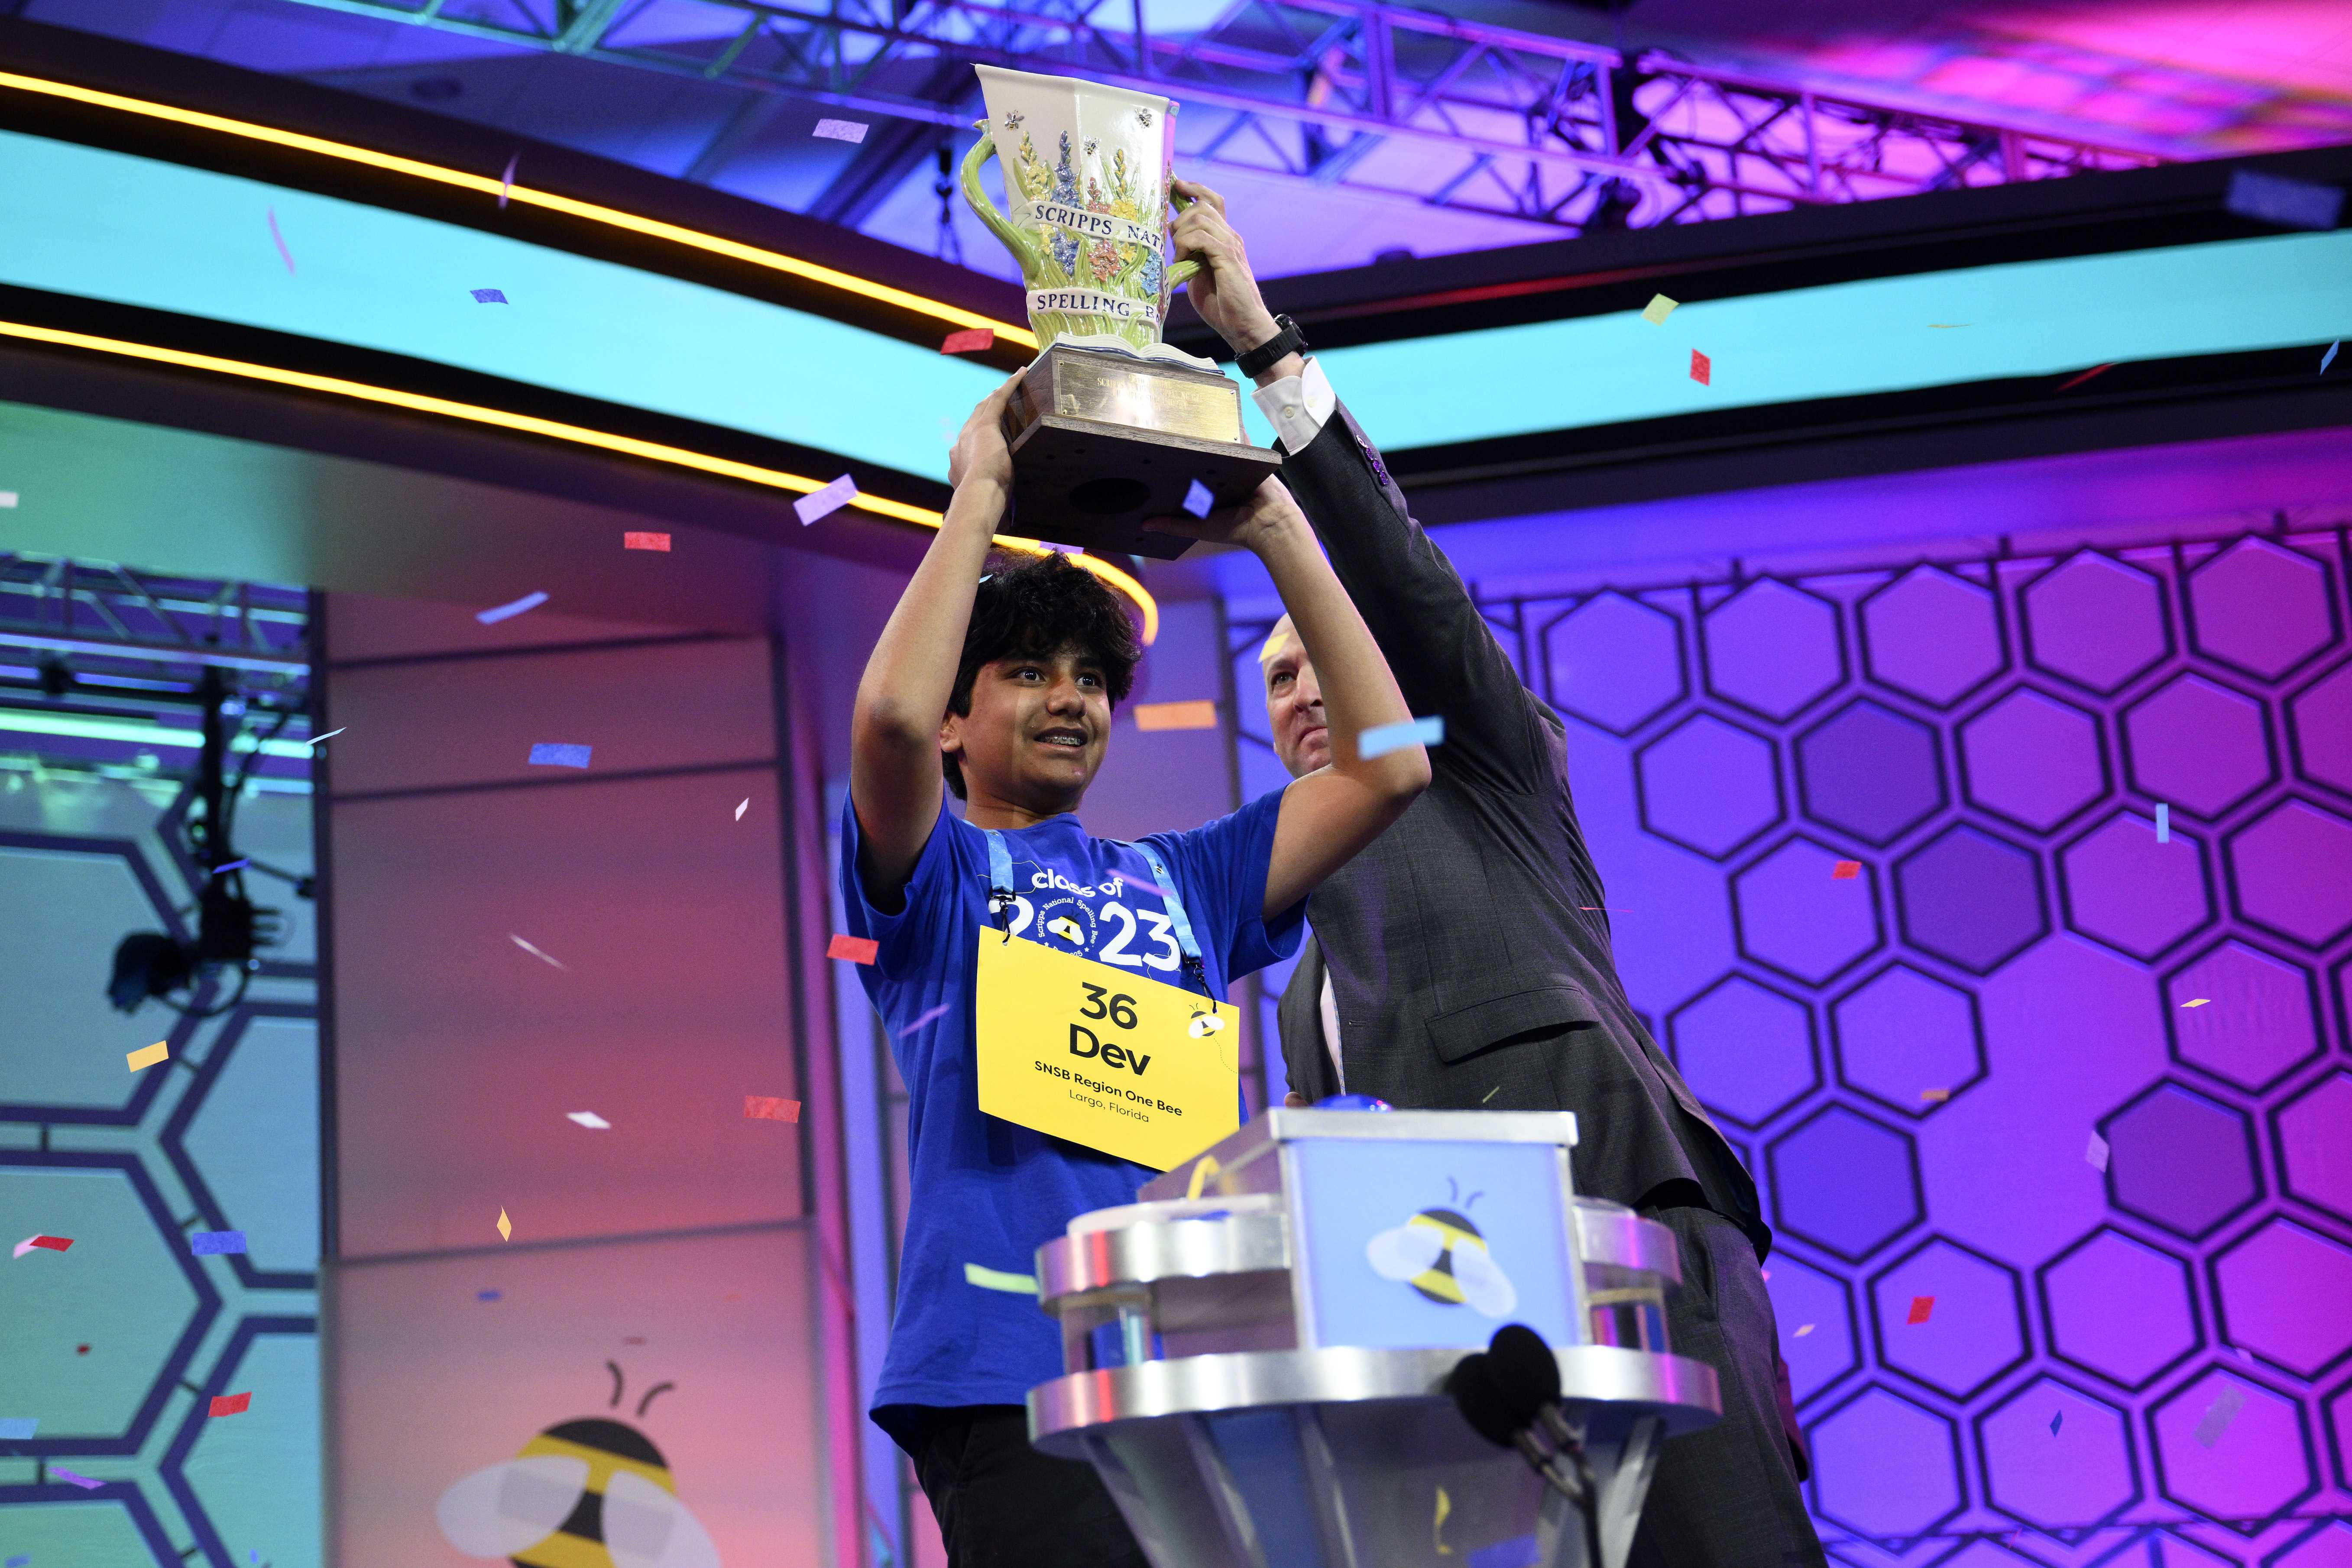 Meet the 14-year-old who won the Scripps National Spelling Bee with 'psammophile'